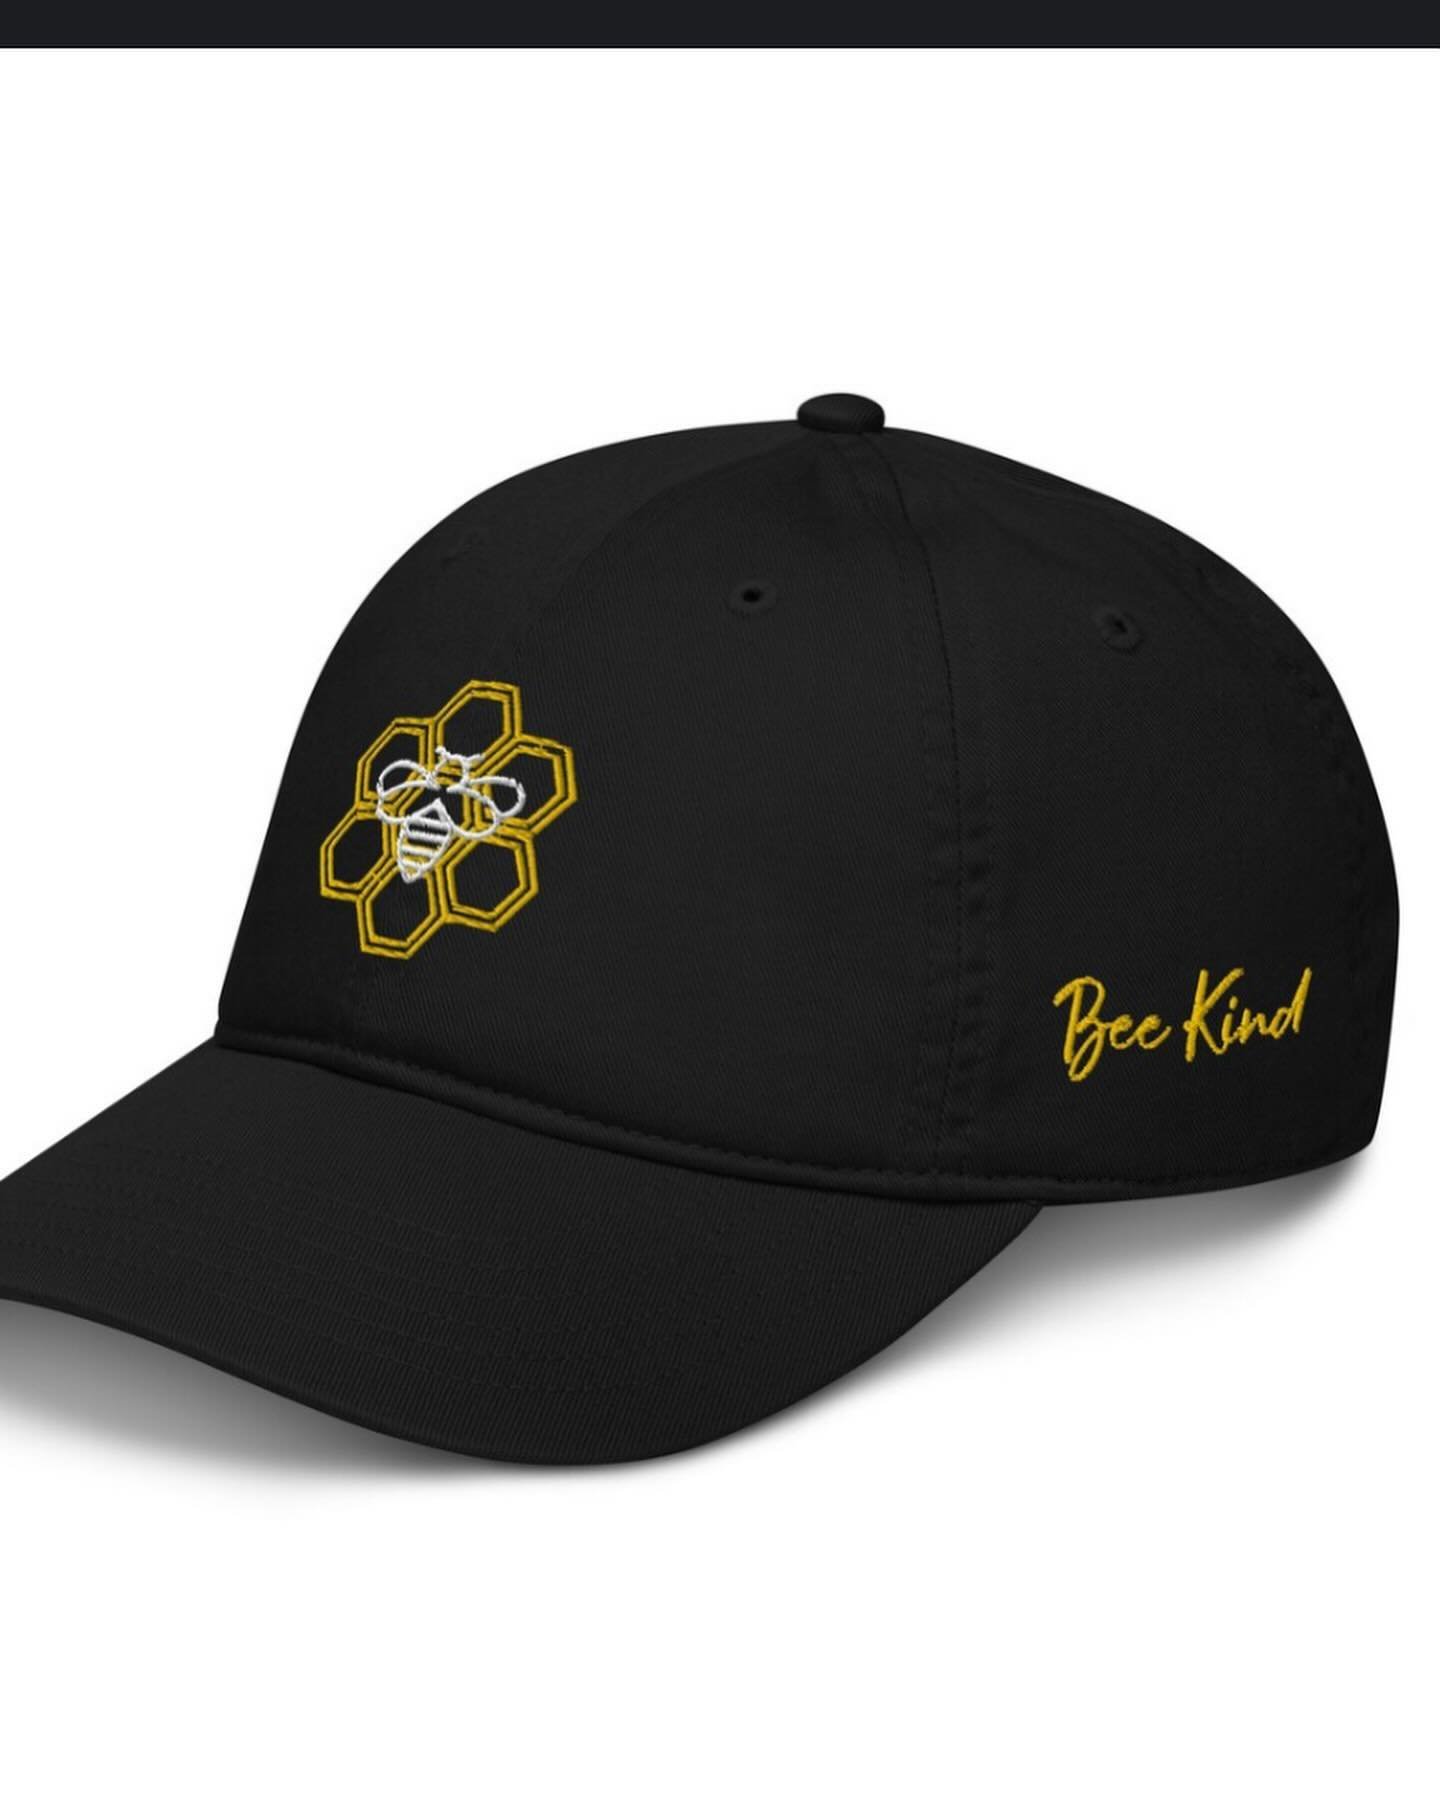 What&rsquo;s up for grabs?! Stop by @mococustom &lsquo;s twitch stream and you can win prizes from artists like me! I am giving away a  Bee Kind shirt, a Bee Kind hat, and a CUSTOM PET PORTRAIT valued at more than $65!  Stop on by! See what all the b